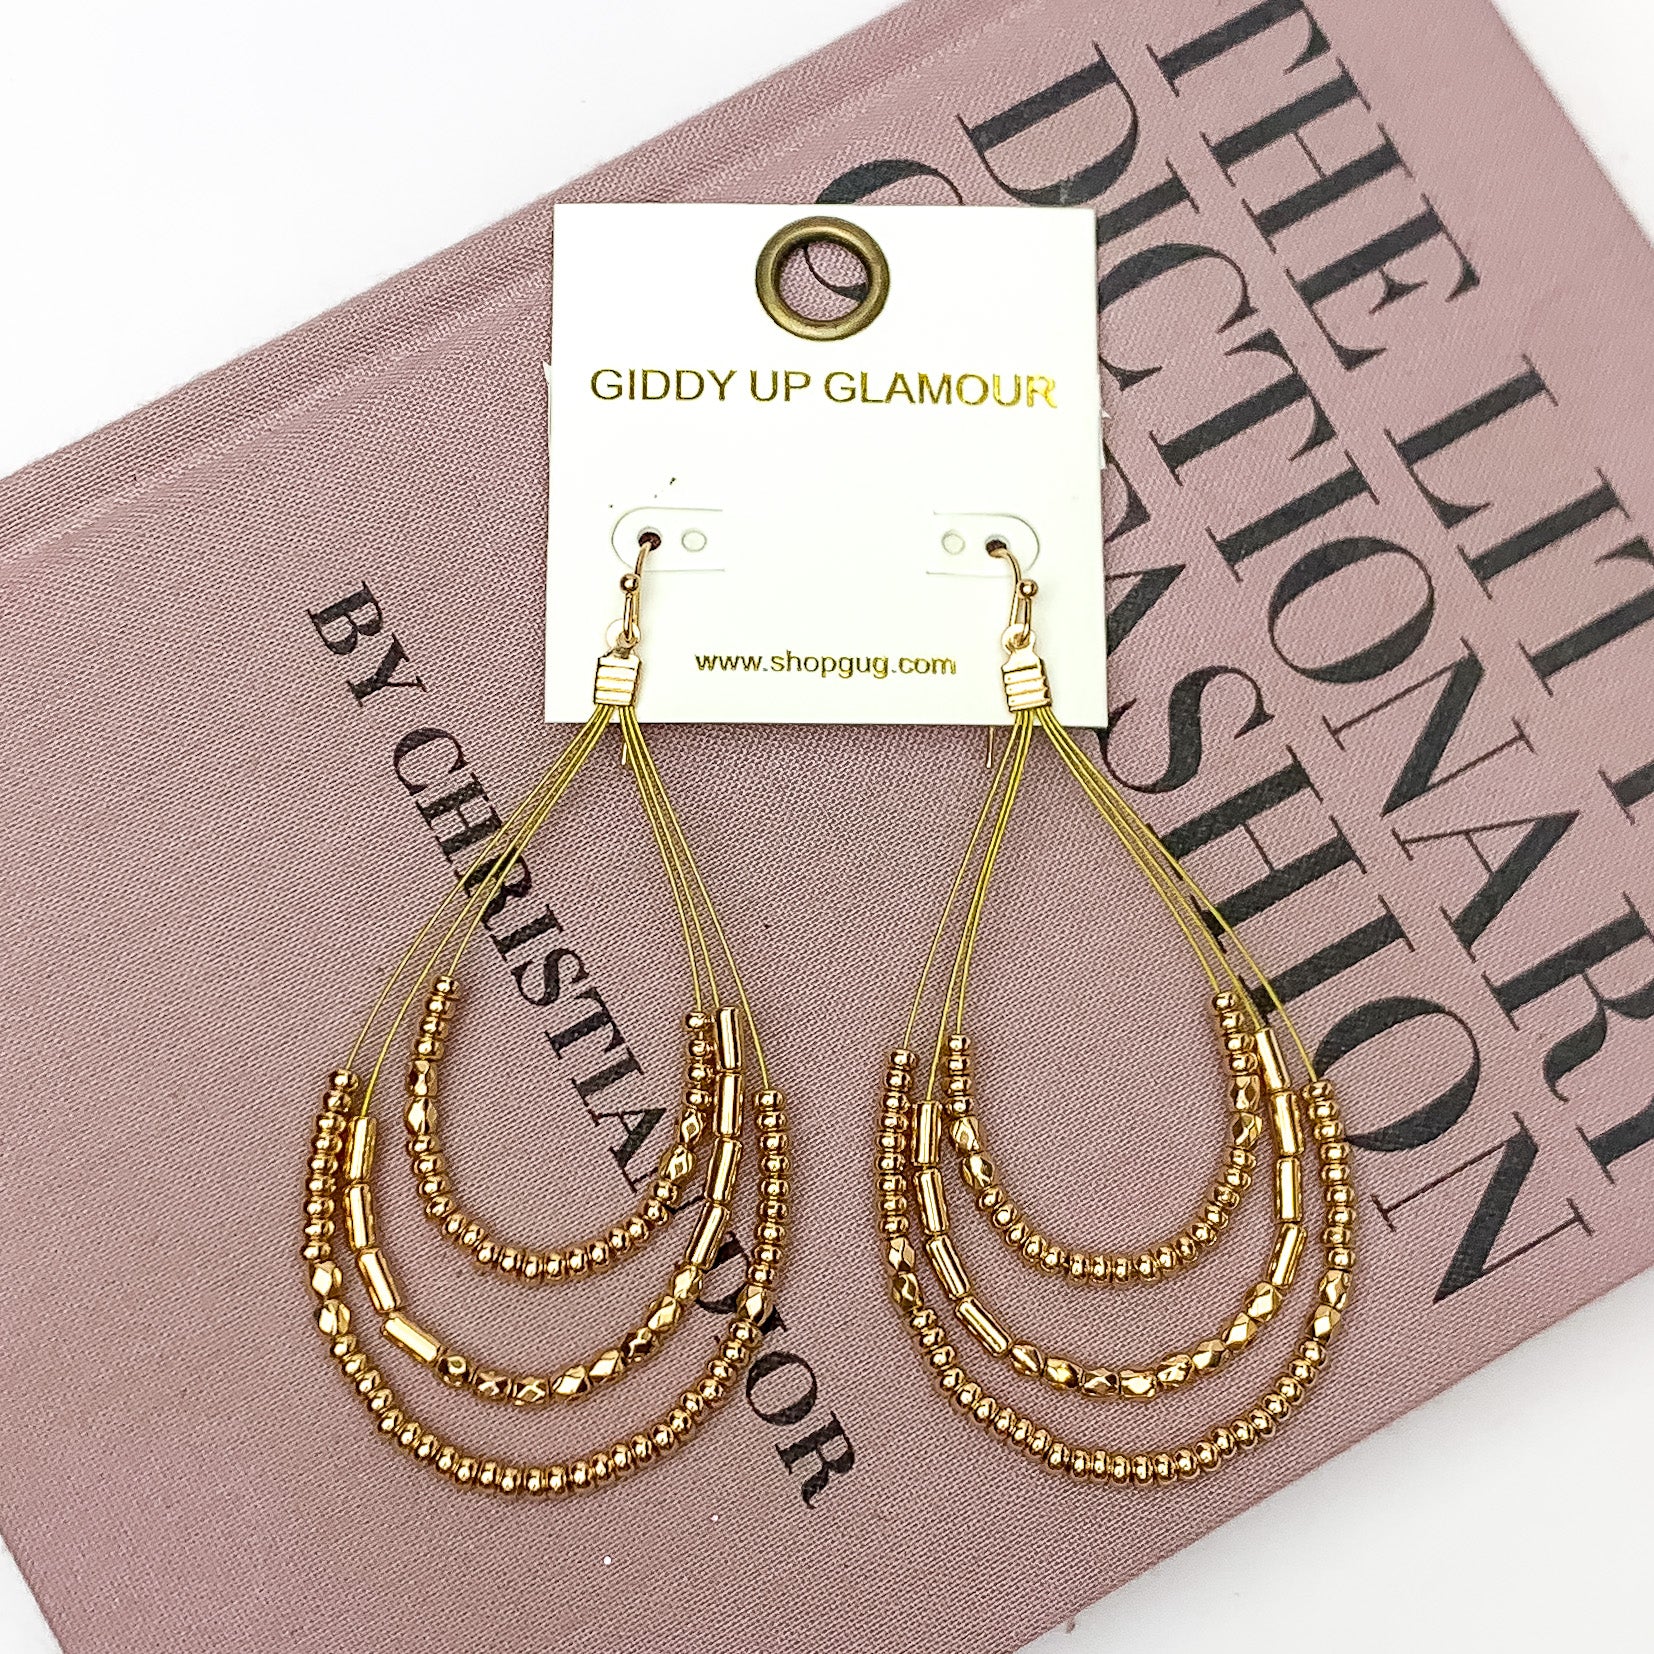 Layered Open Teardrop Earrings With Beads in Gold Tone. Pictured on a white background with the earrings laying on a pink book.